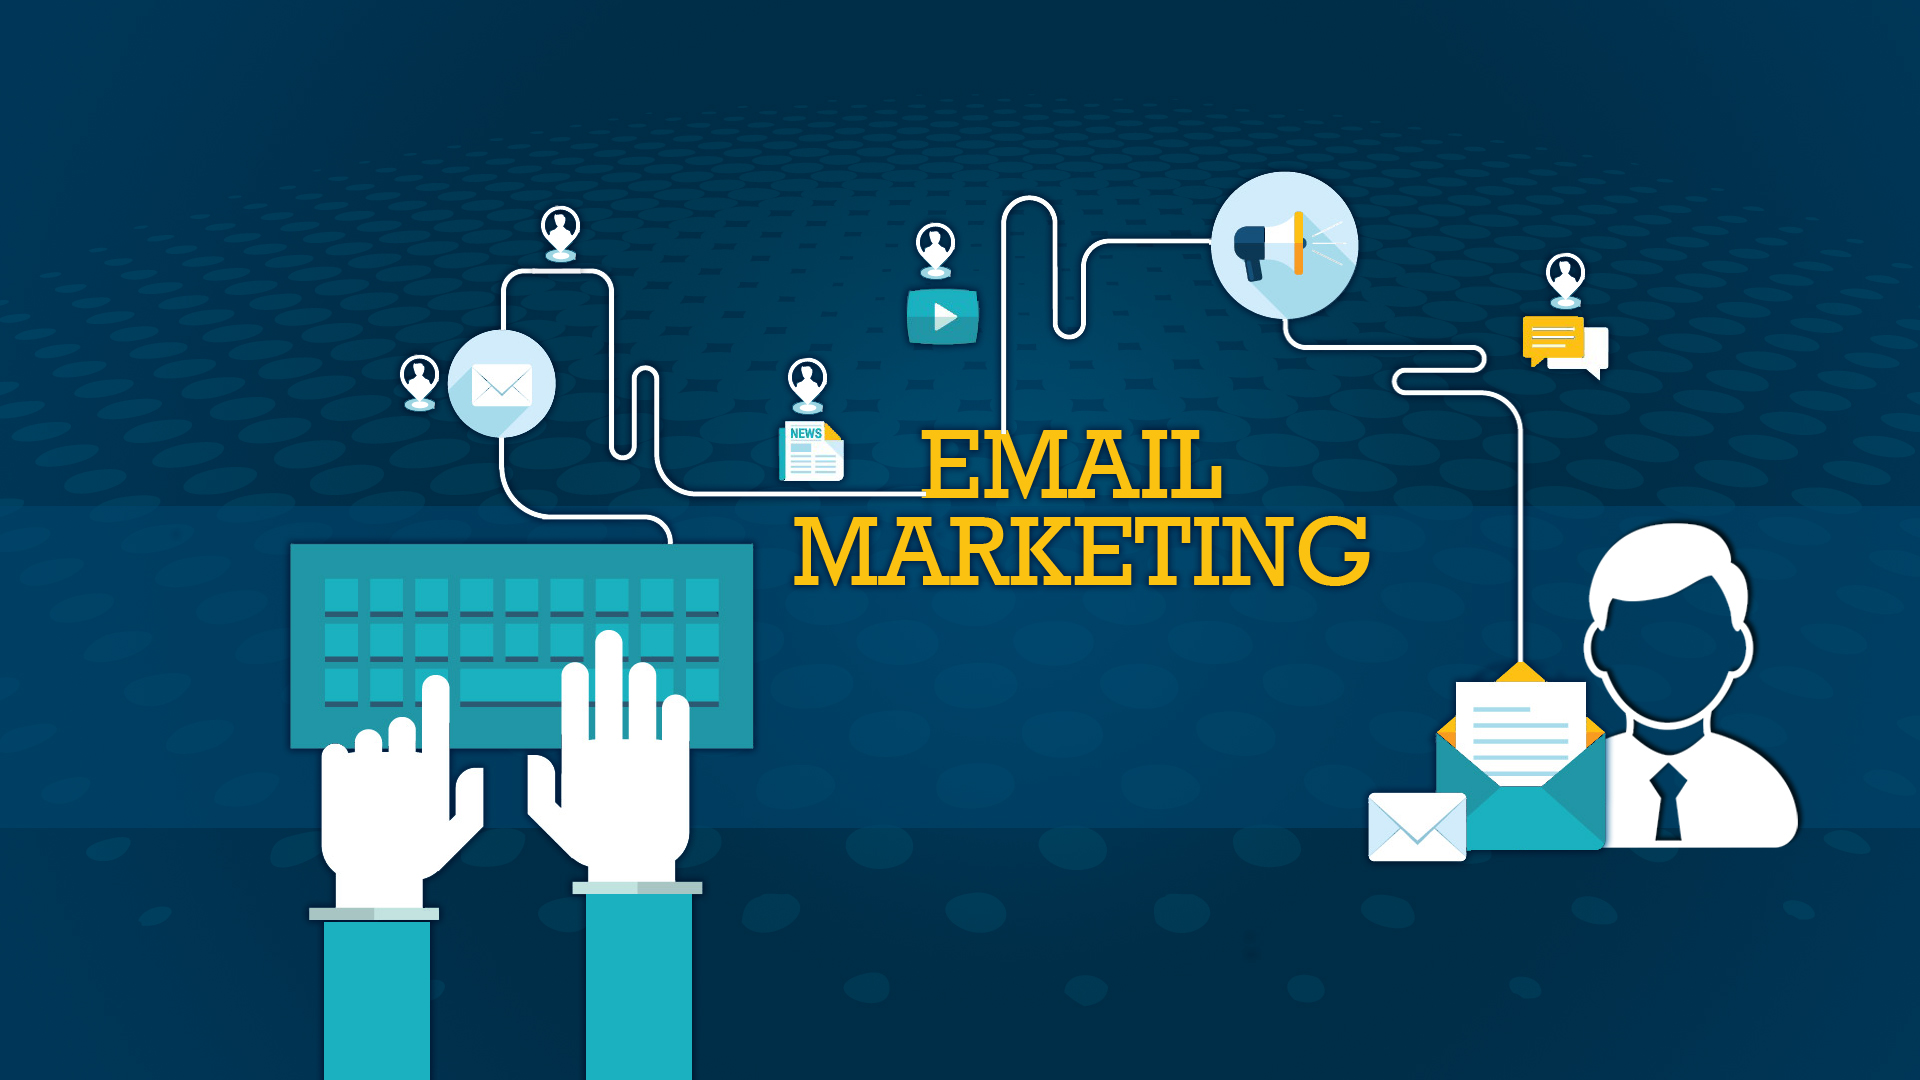 7 Best Practices to Generate Leads Through Email Marketing